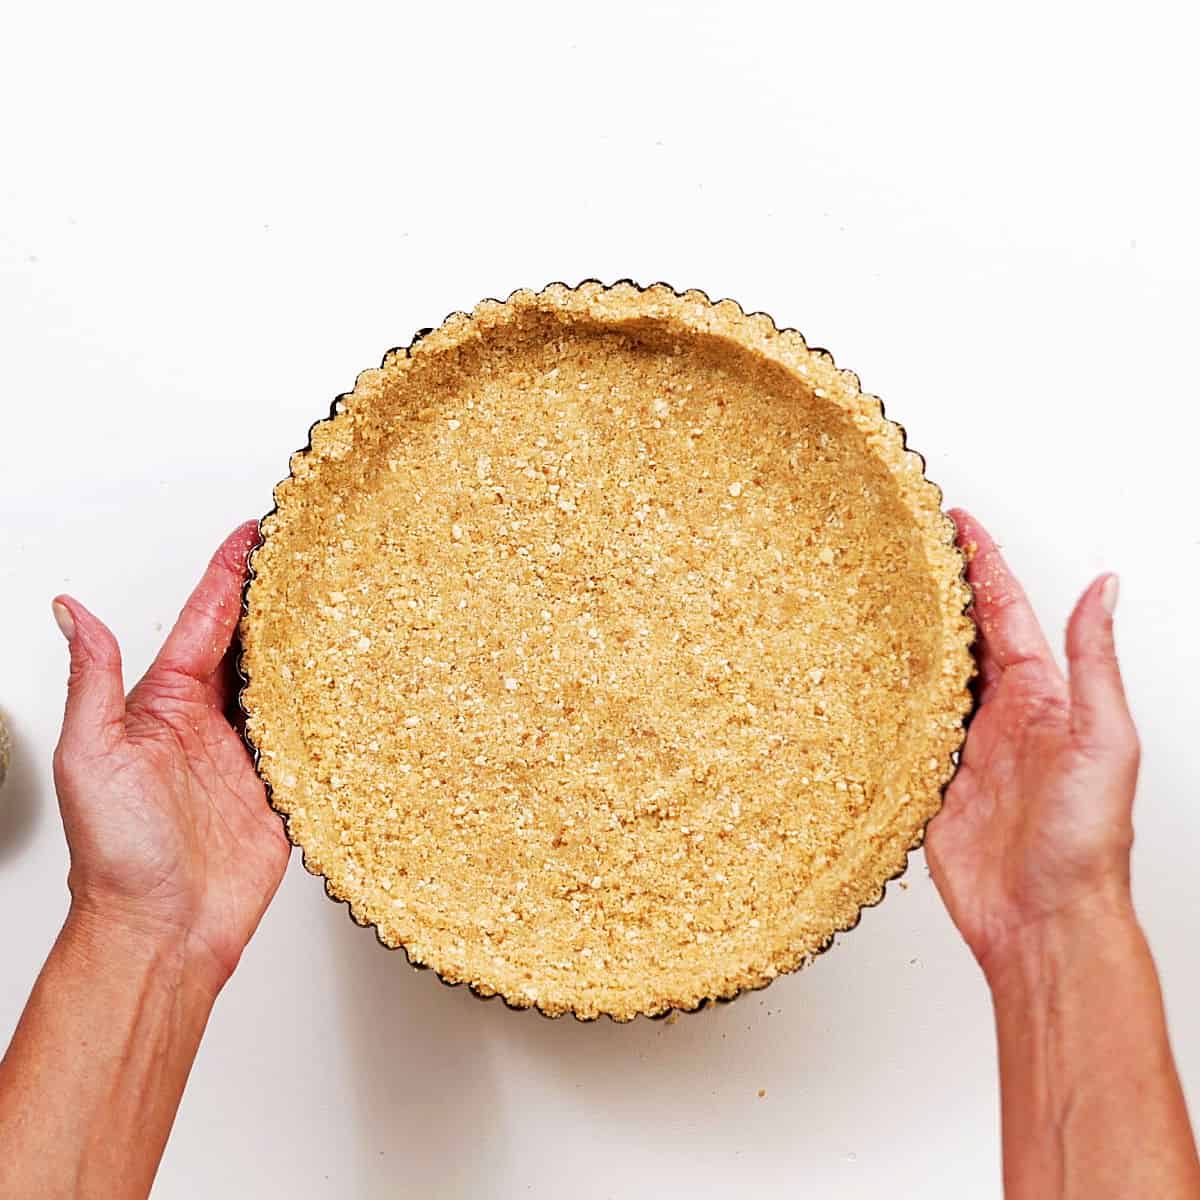 Holding graham cracker crust with both hands on white surface.